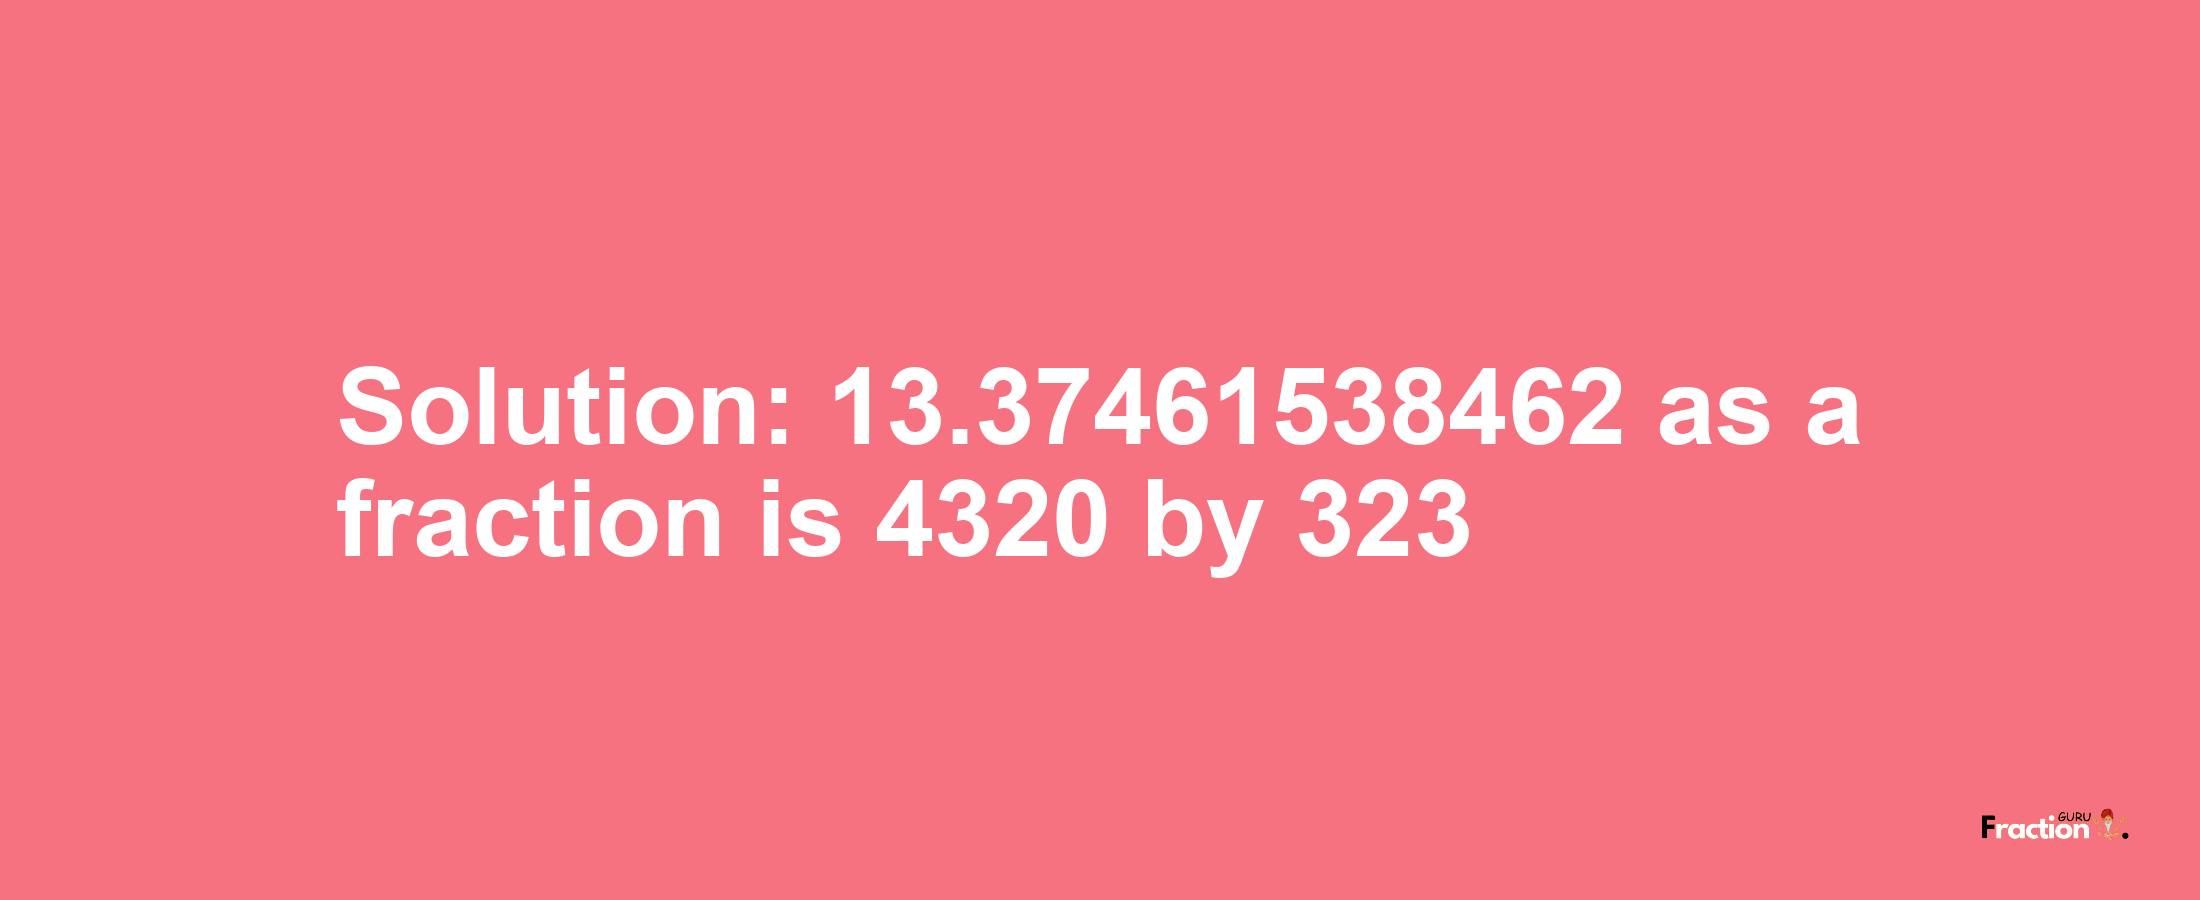 Solution:13.37461538462 as a fraction is 4320/323